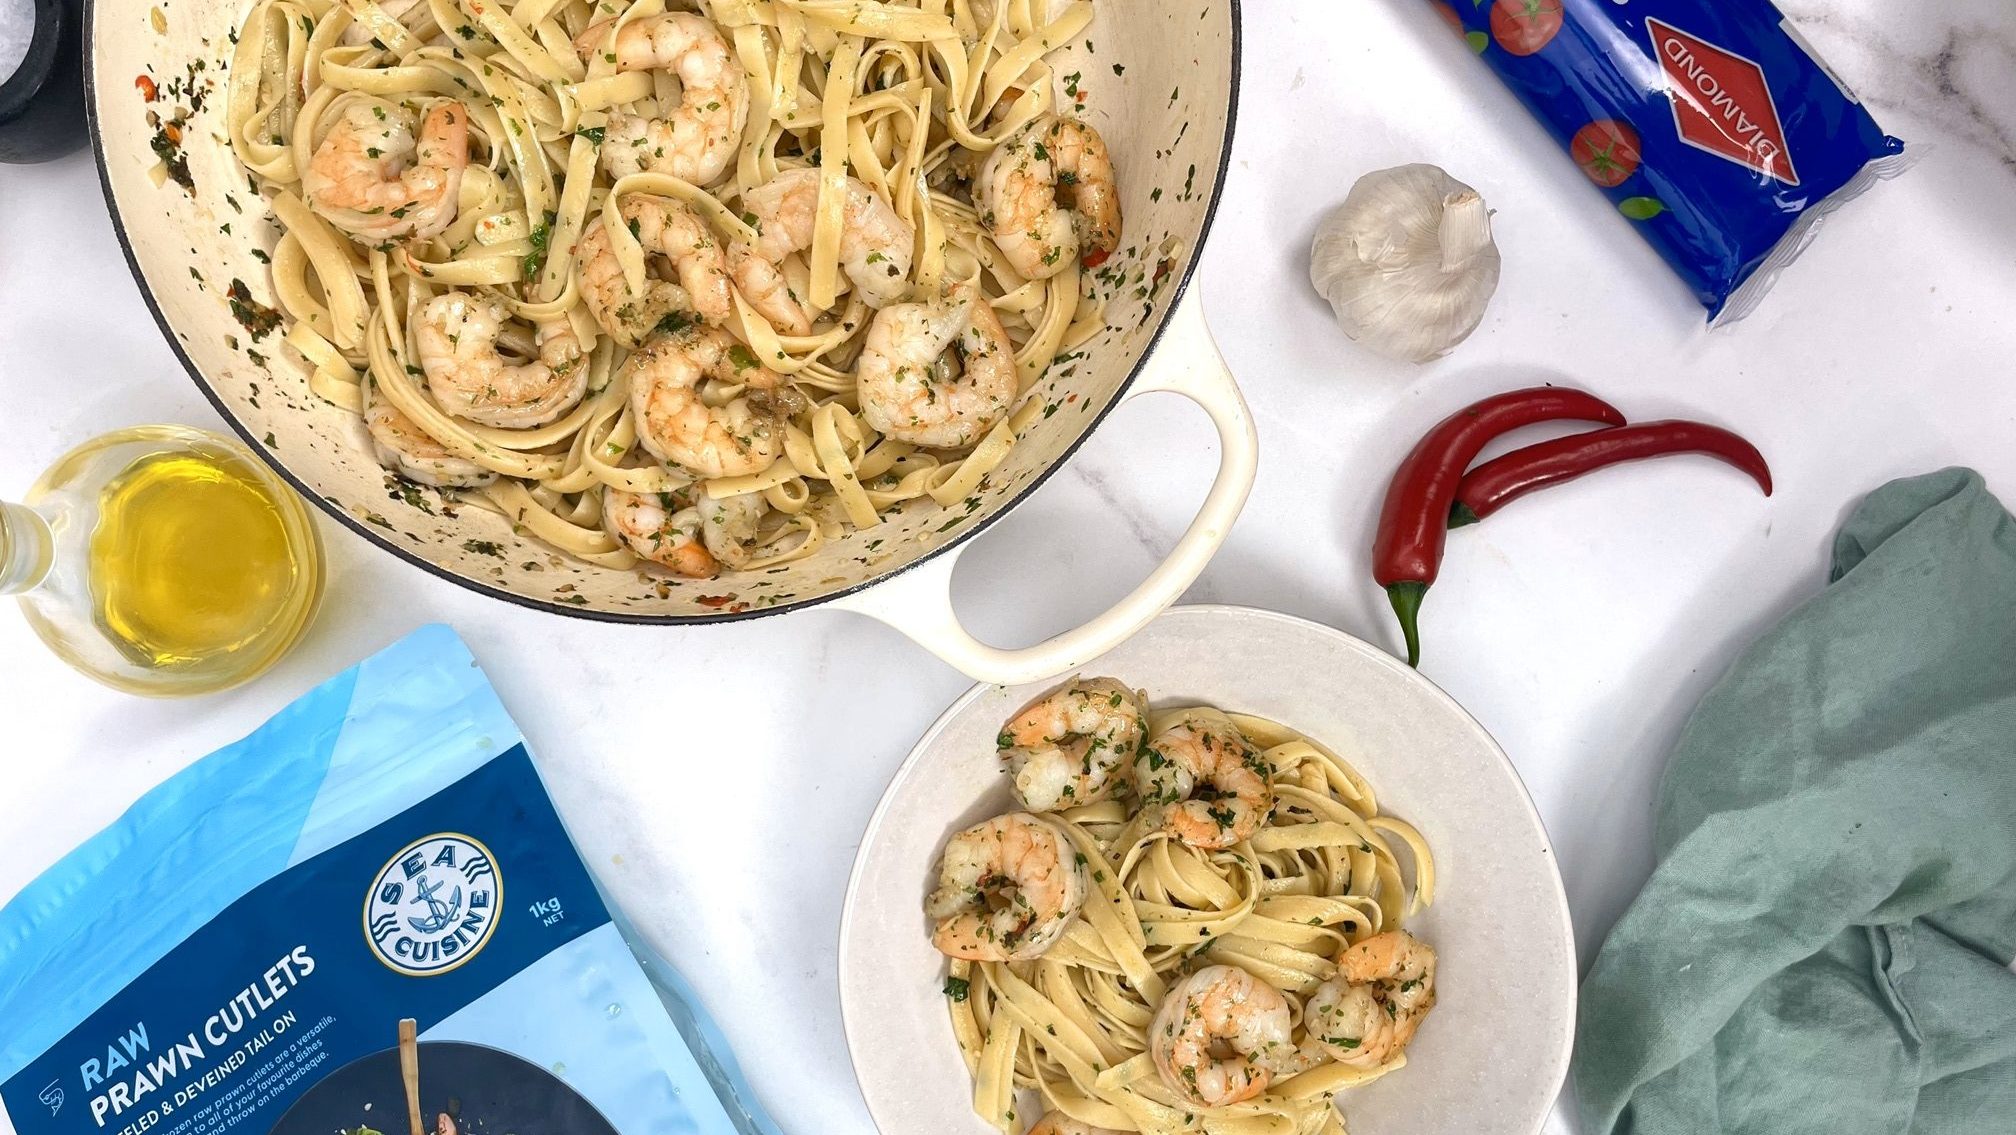 A pot and a plate of pasta with prawns and packs of prawns and pats by sides.